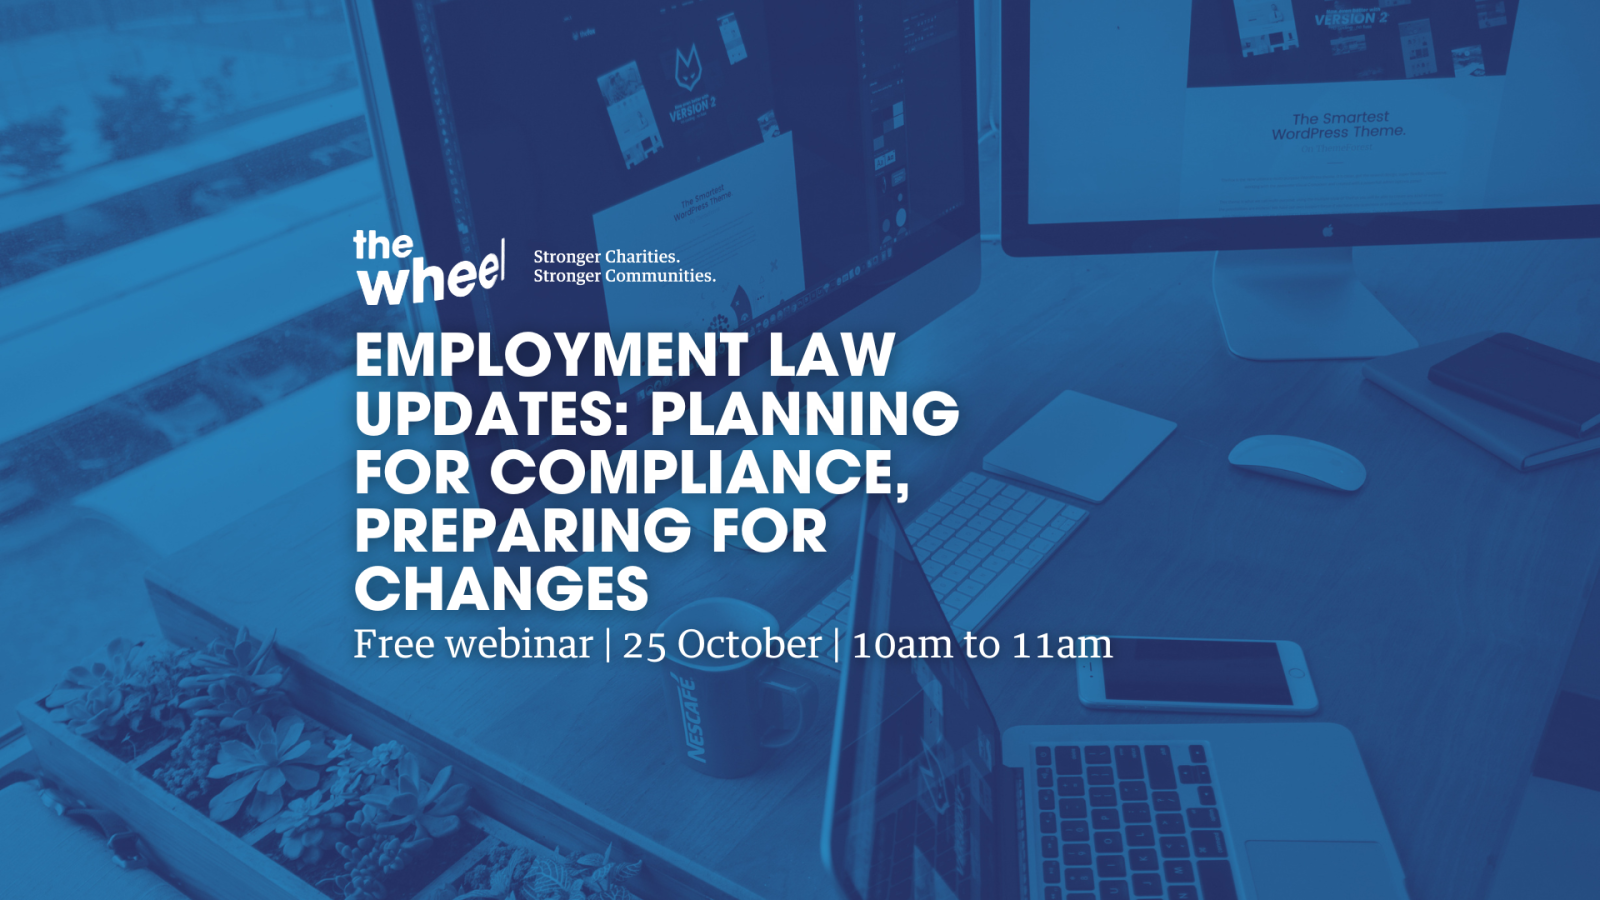 Employment Law Updates: Planning for Compliance, Preparing for Changes (25 Oct 2022)